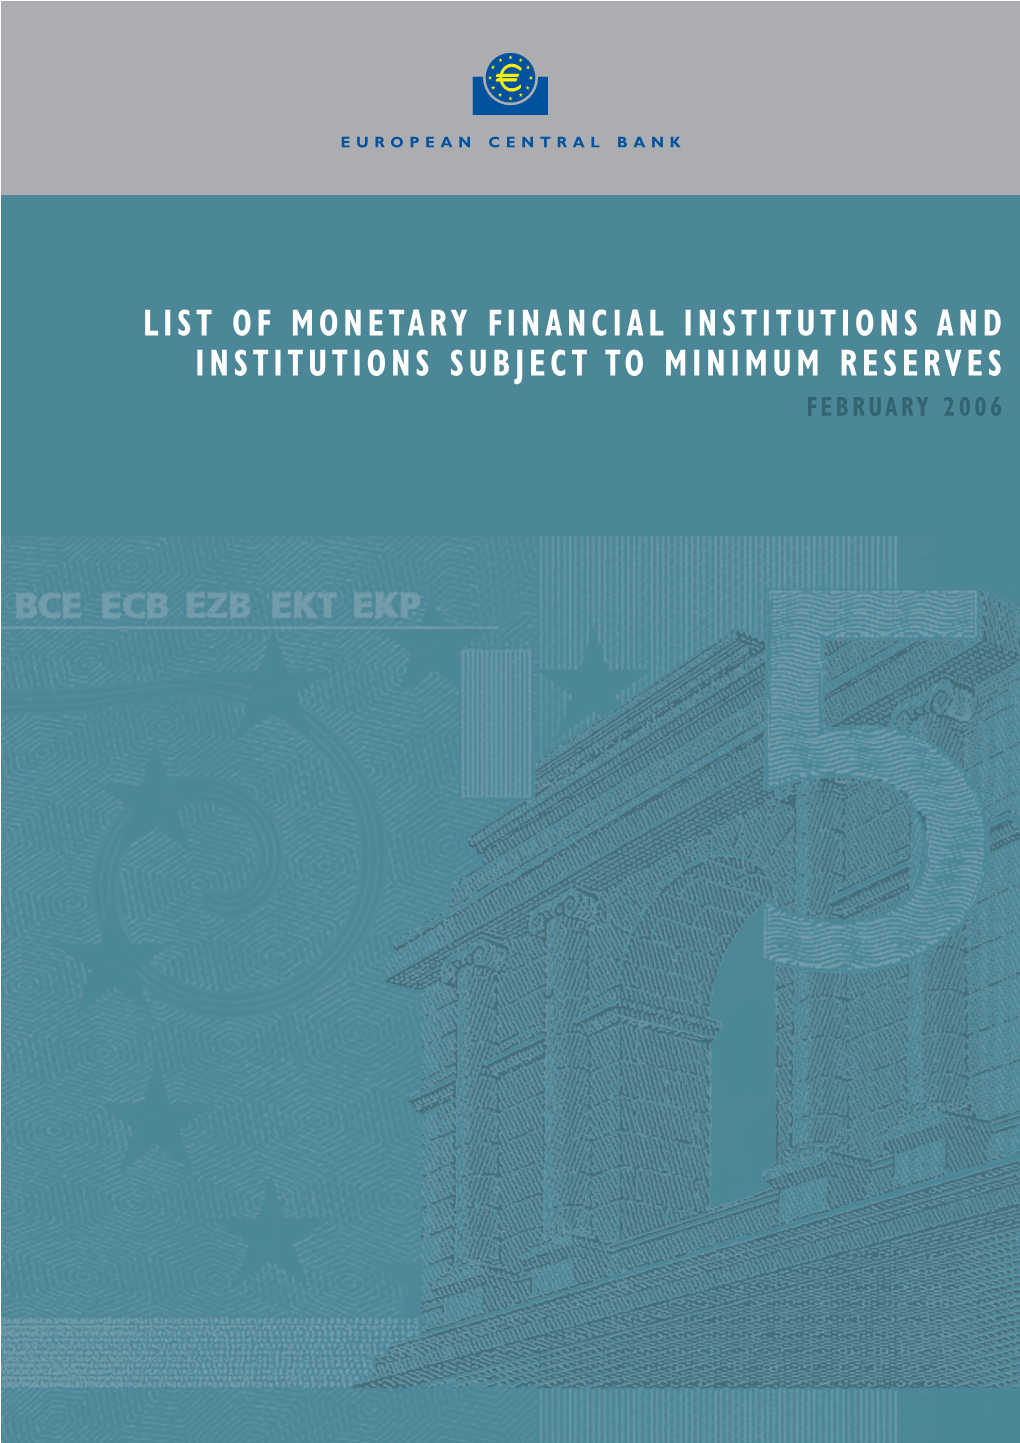 List of Monetary Financial Institutions and Institutions Subject to Minimum